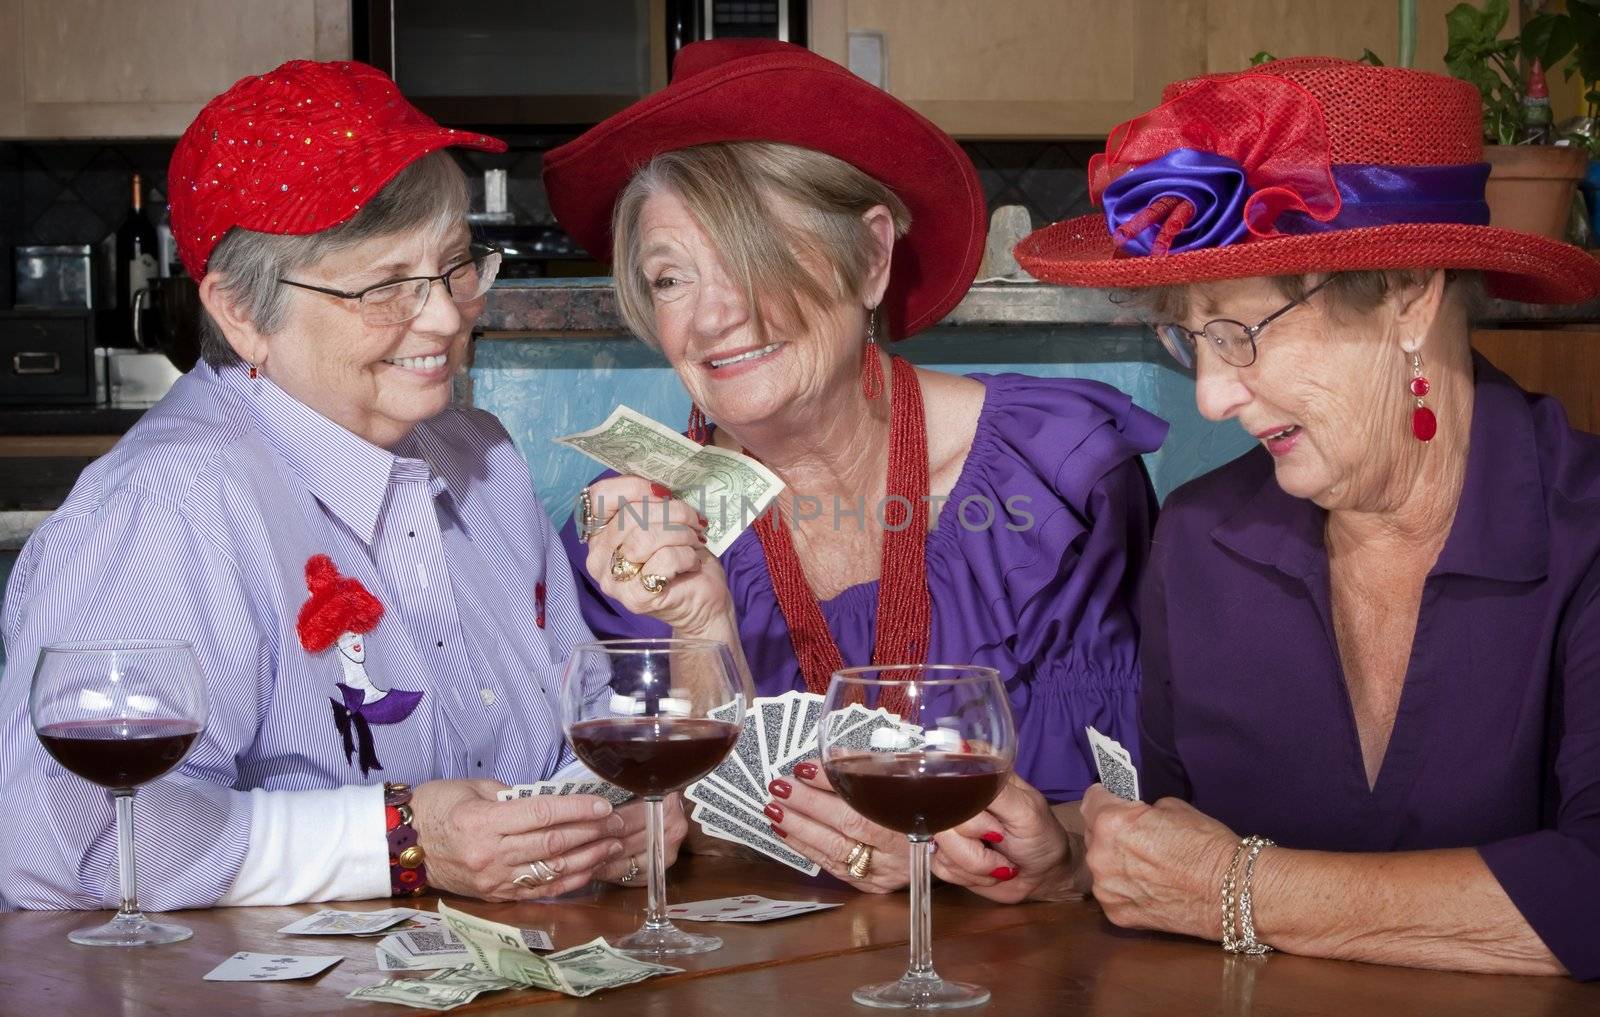 Ladies wearing red hats playing cards by Creatista